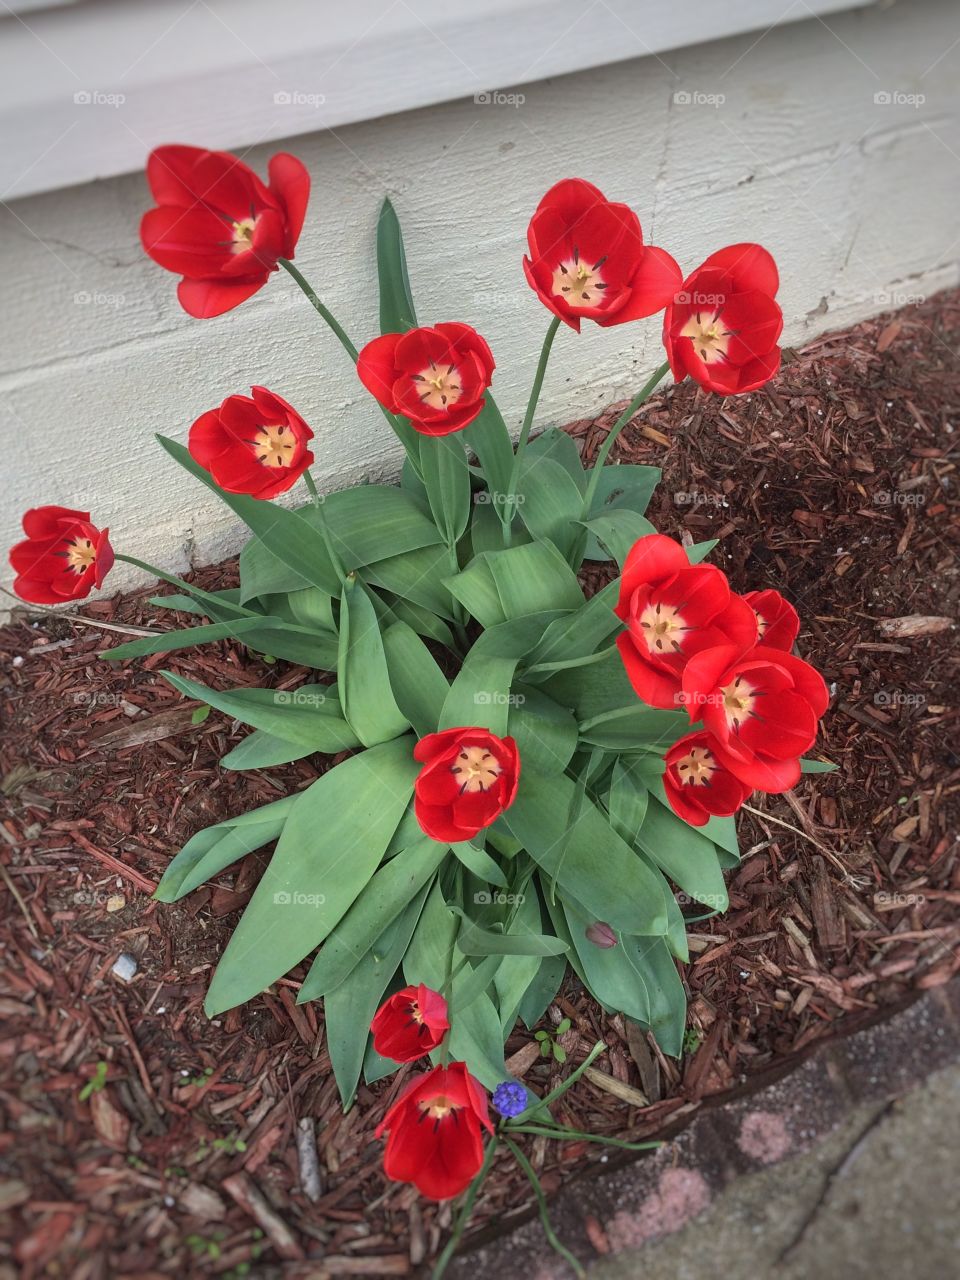 Just some tulips 